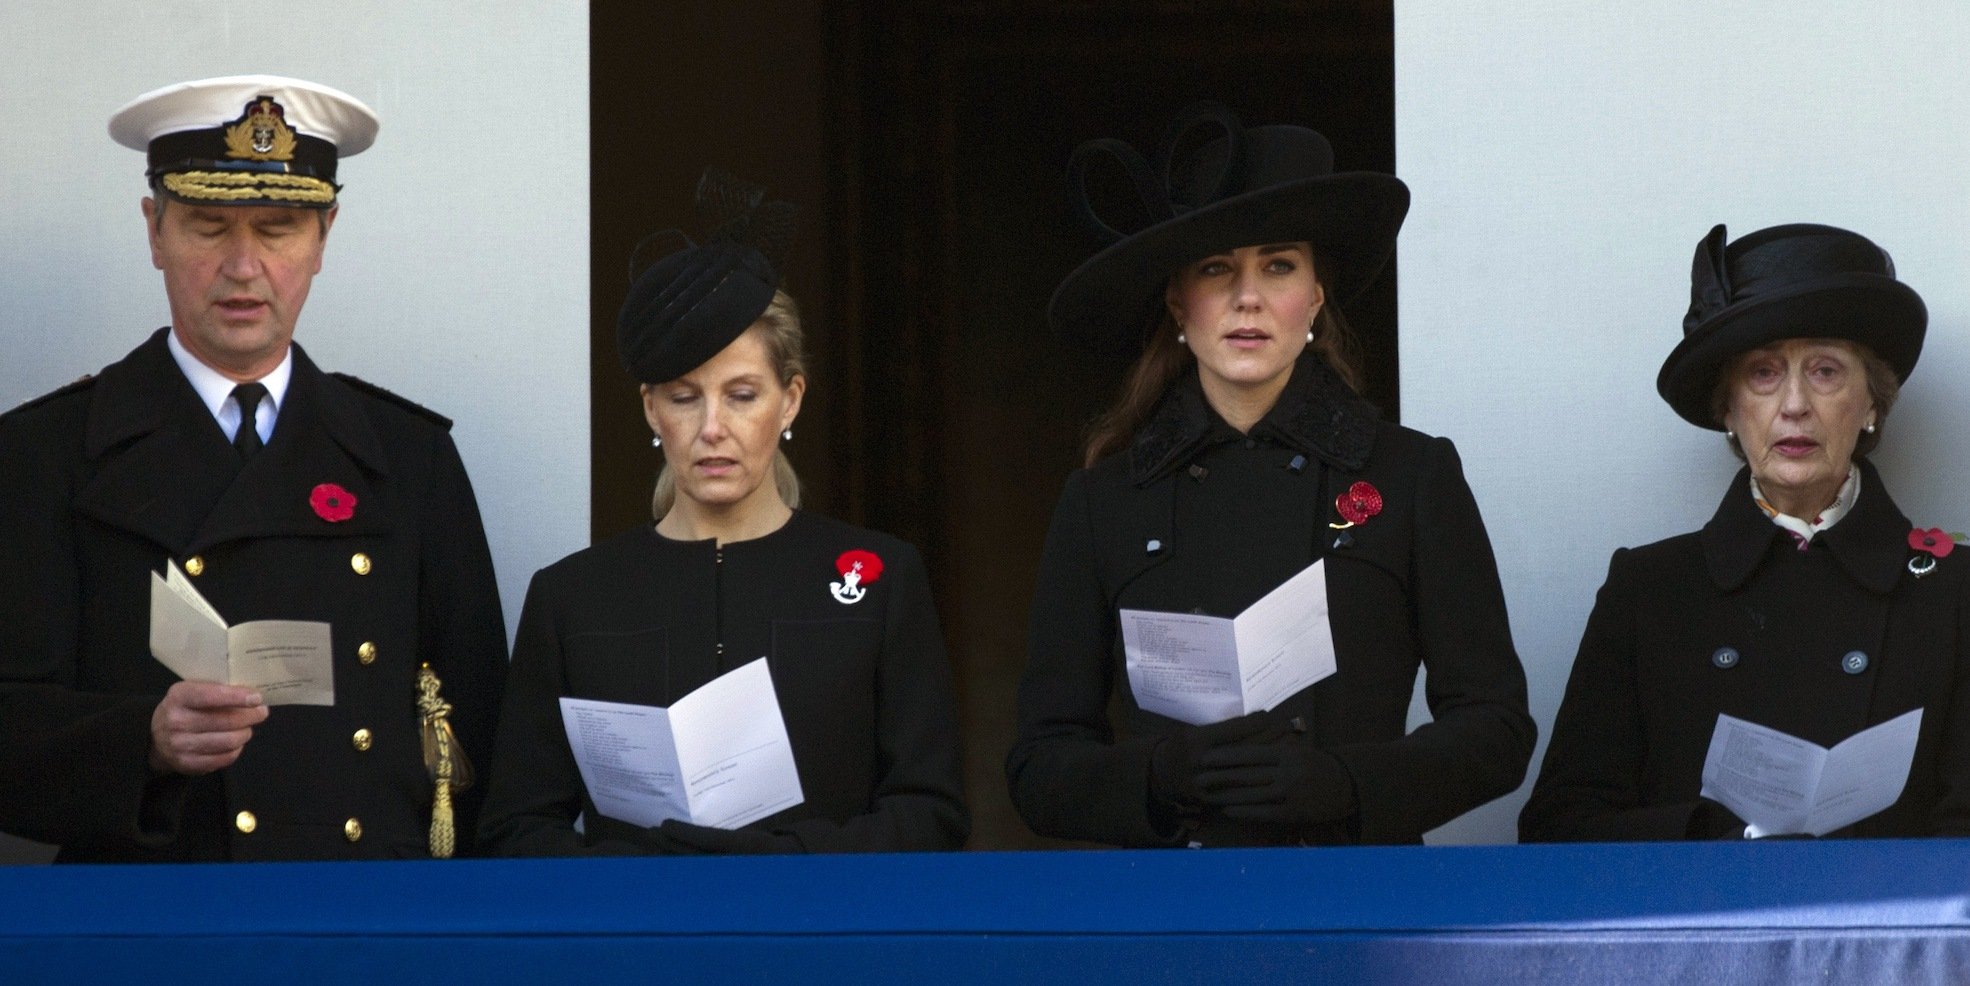 Britain's Catherine, Duchess of Cambridge (2nd R), Sophie, Countess of Wessex (2nd L), Vice Admiral Timothy Laurence (L), and Lady in Waiting Lady Susan Hussey (R)